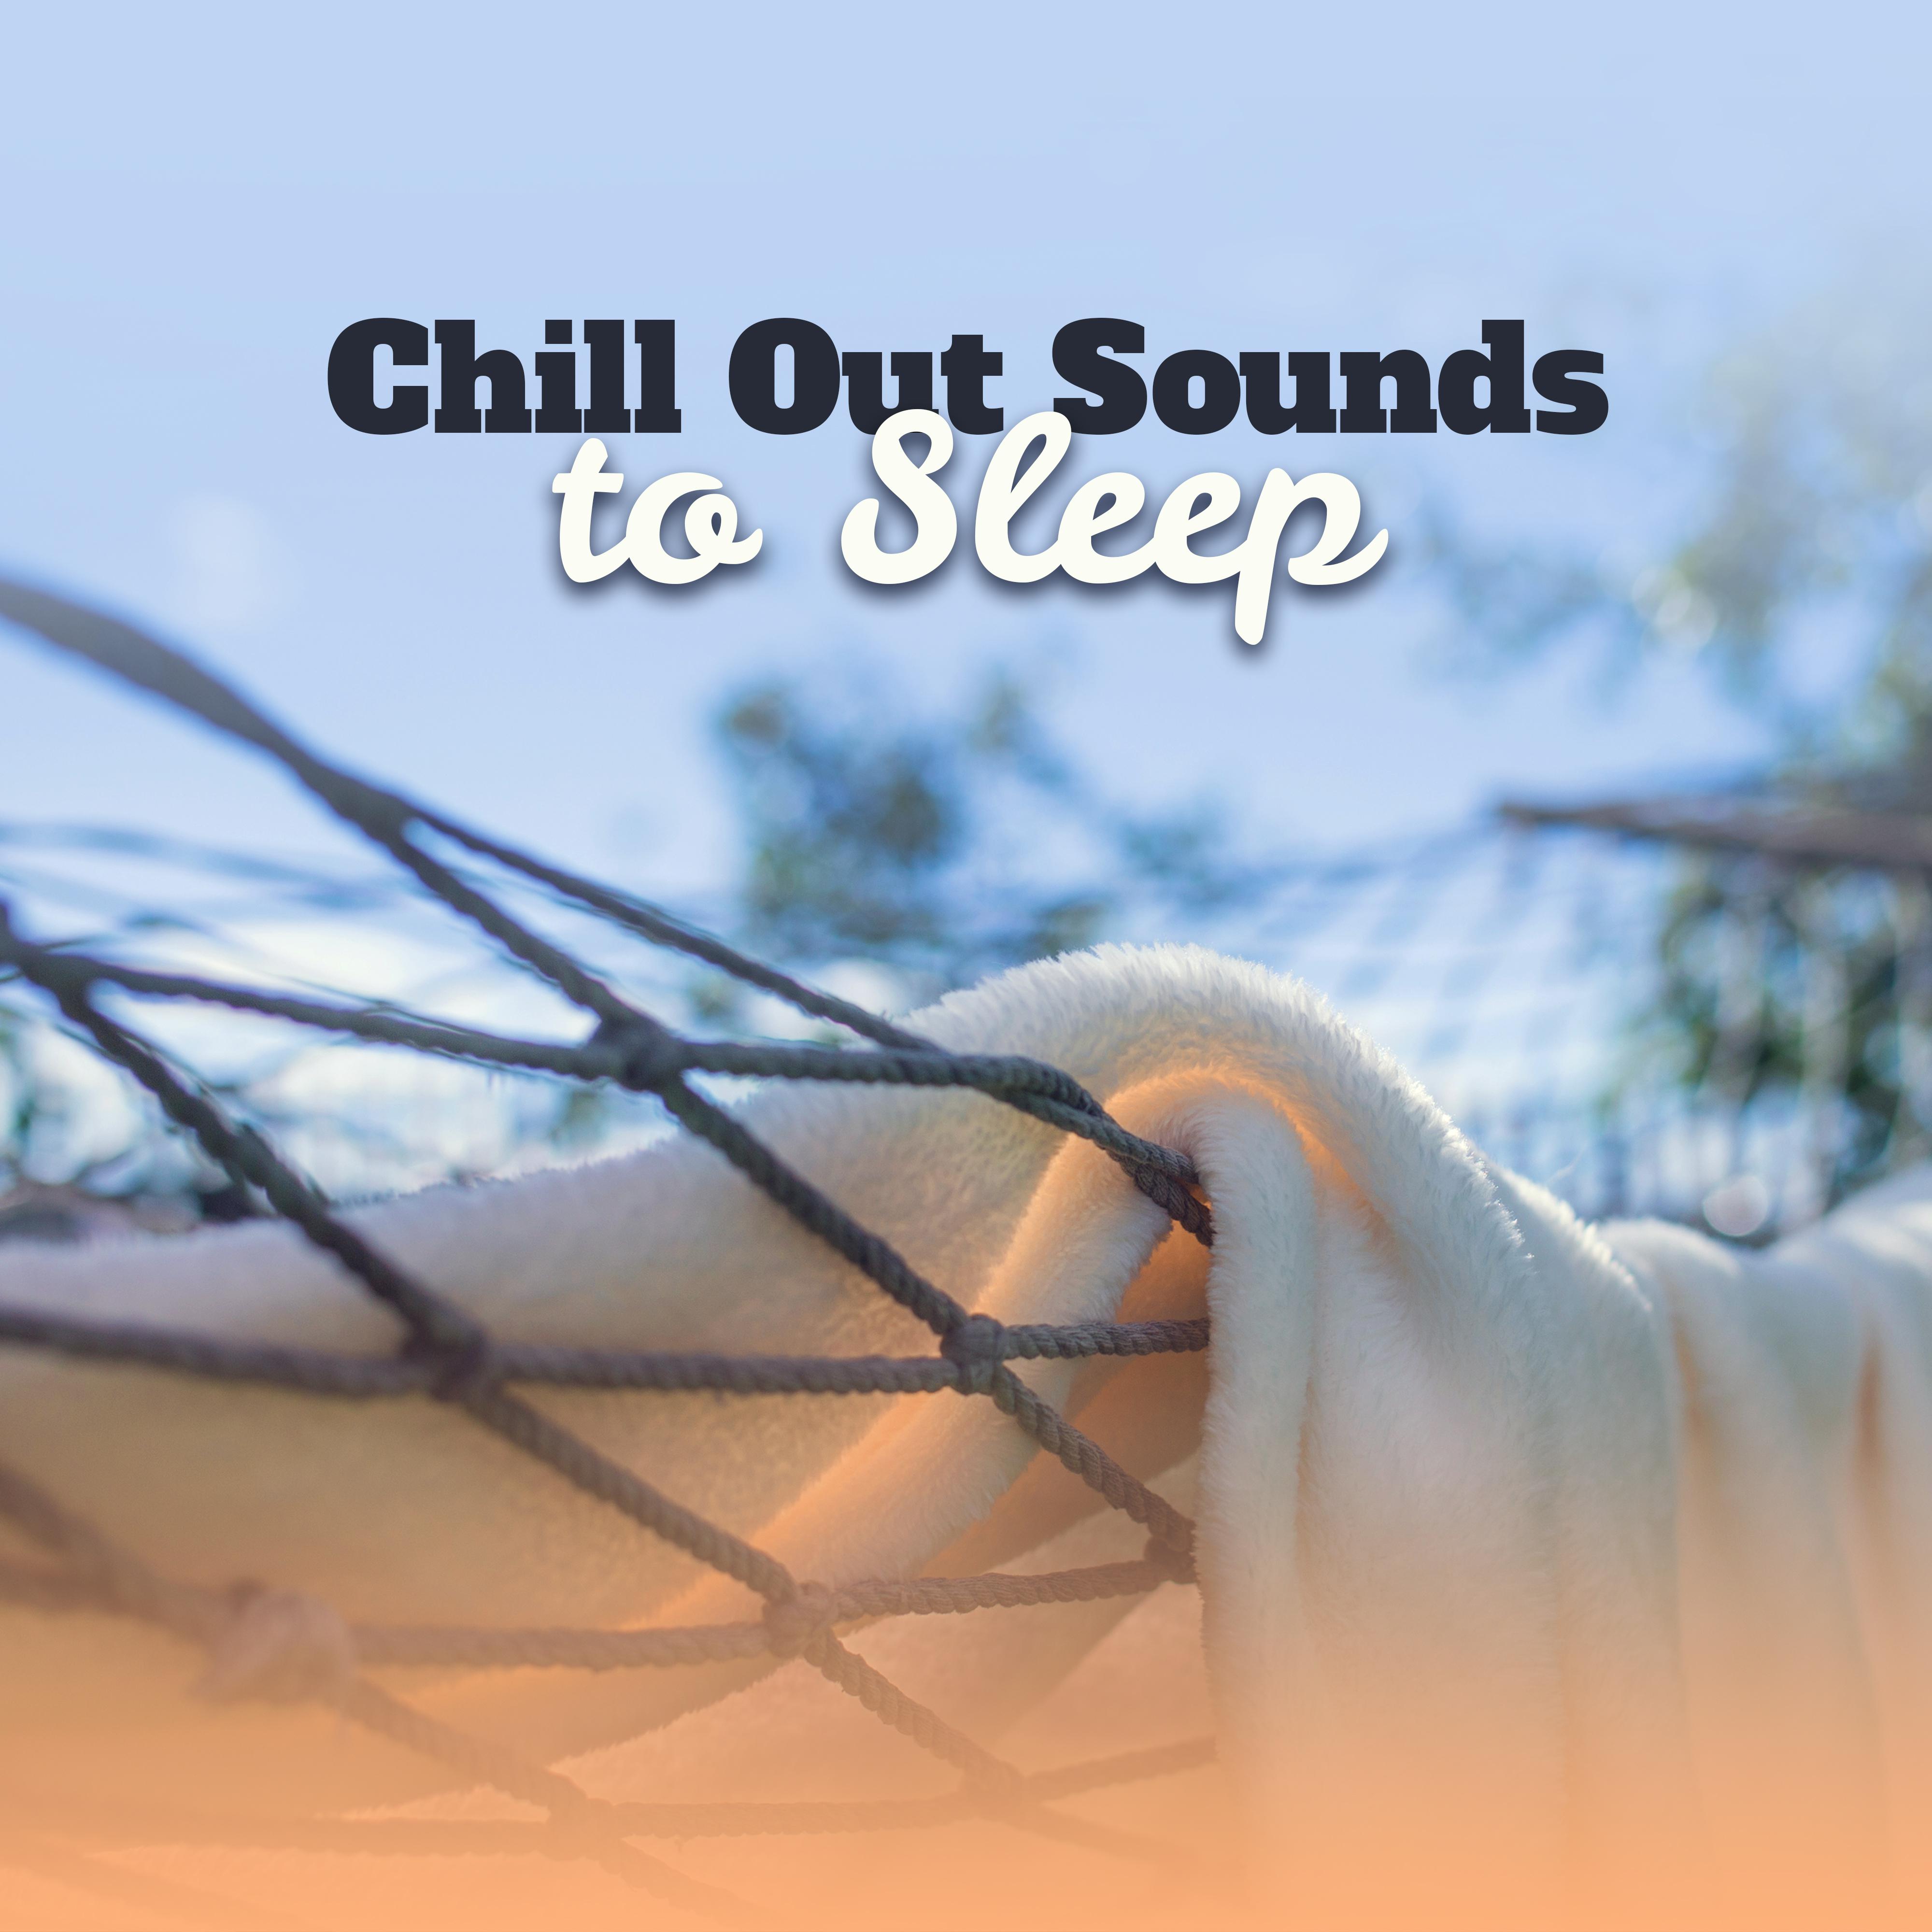 Chill Out Sounds to Sleep – Relaxing Night Chill, Summer Rest, Evening Beach Lounge